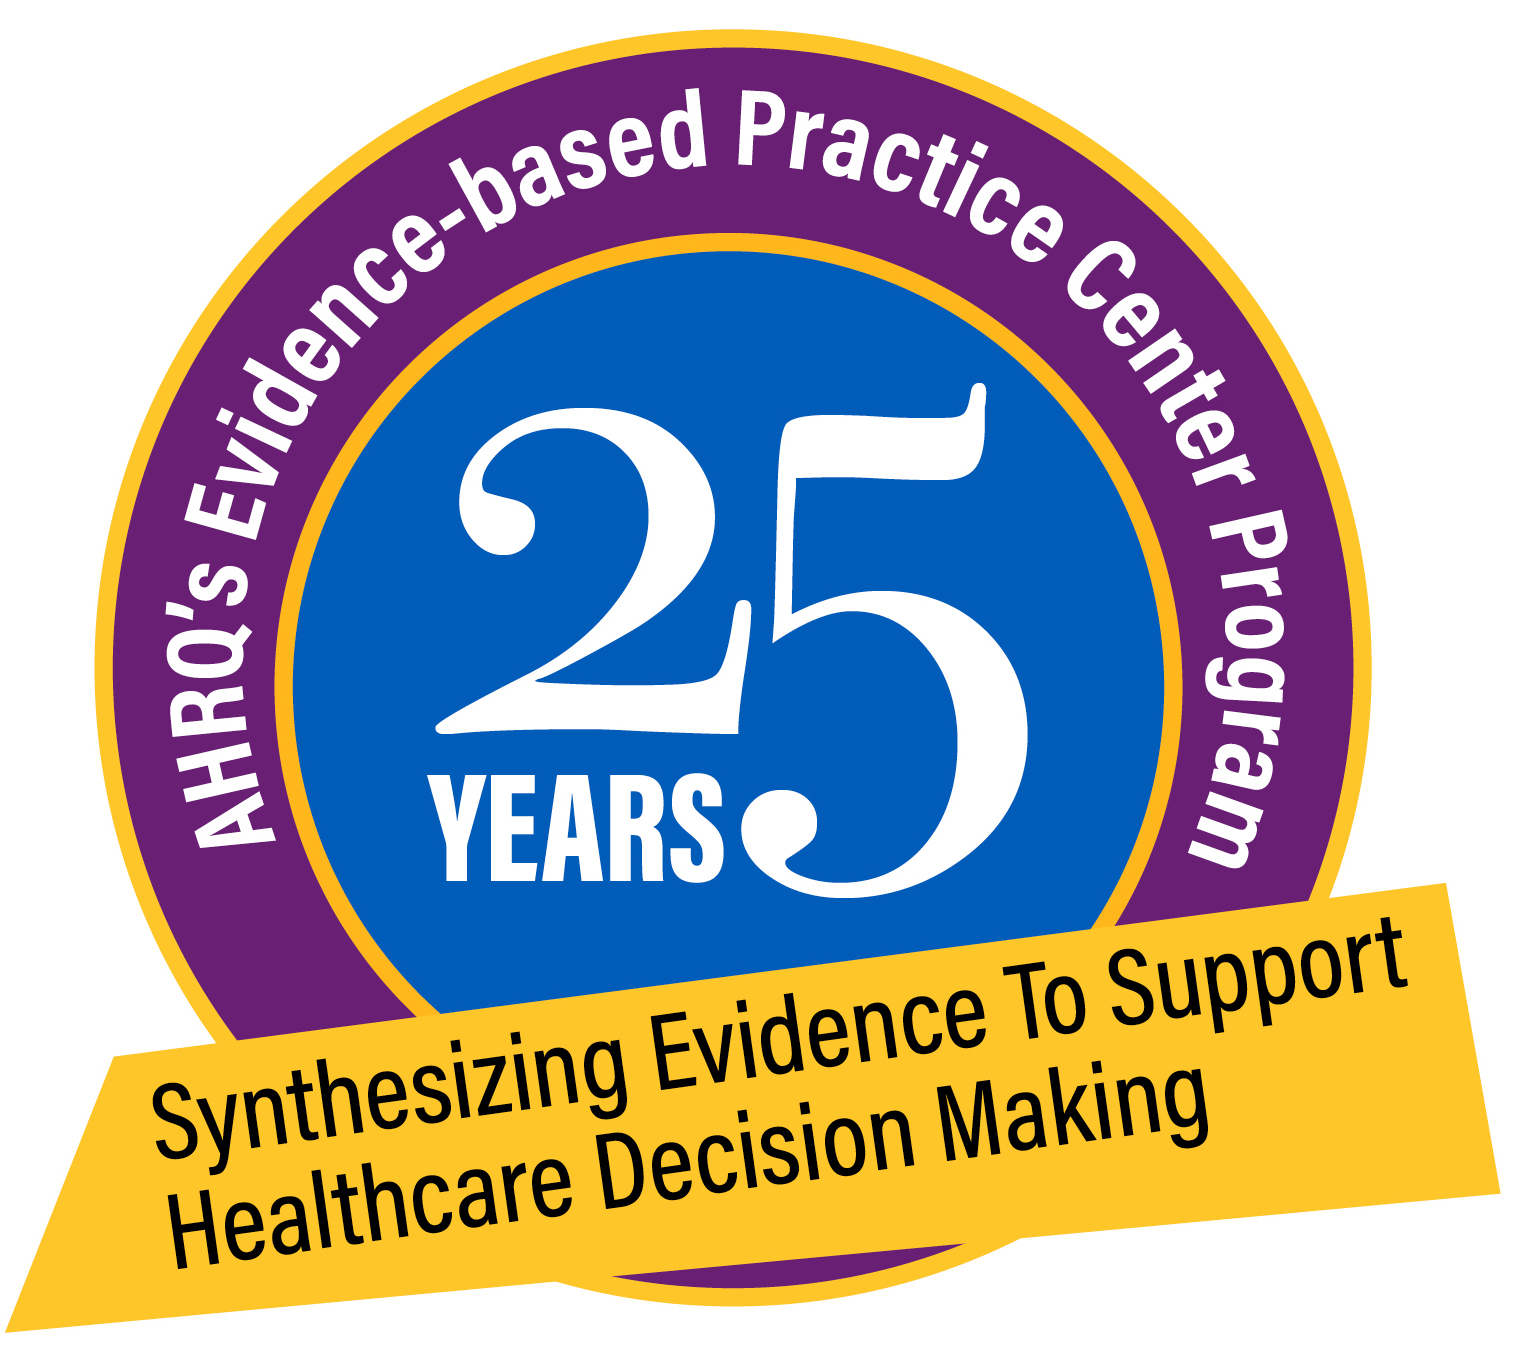 25 Years of AHRQ's Evidence-Based Practice Center Program - Synthesizing Evidence to Support Healthcare Decisionmaking logo 